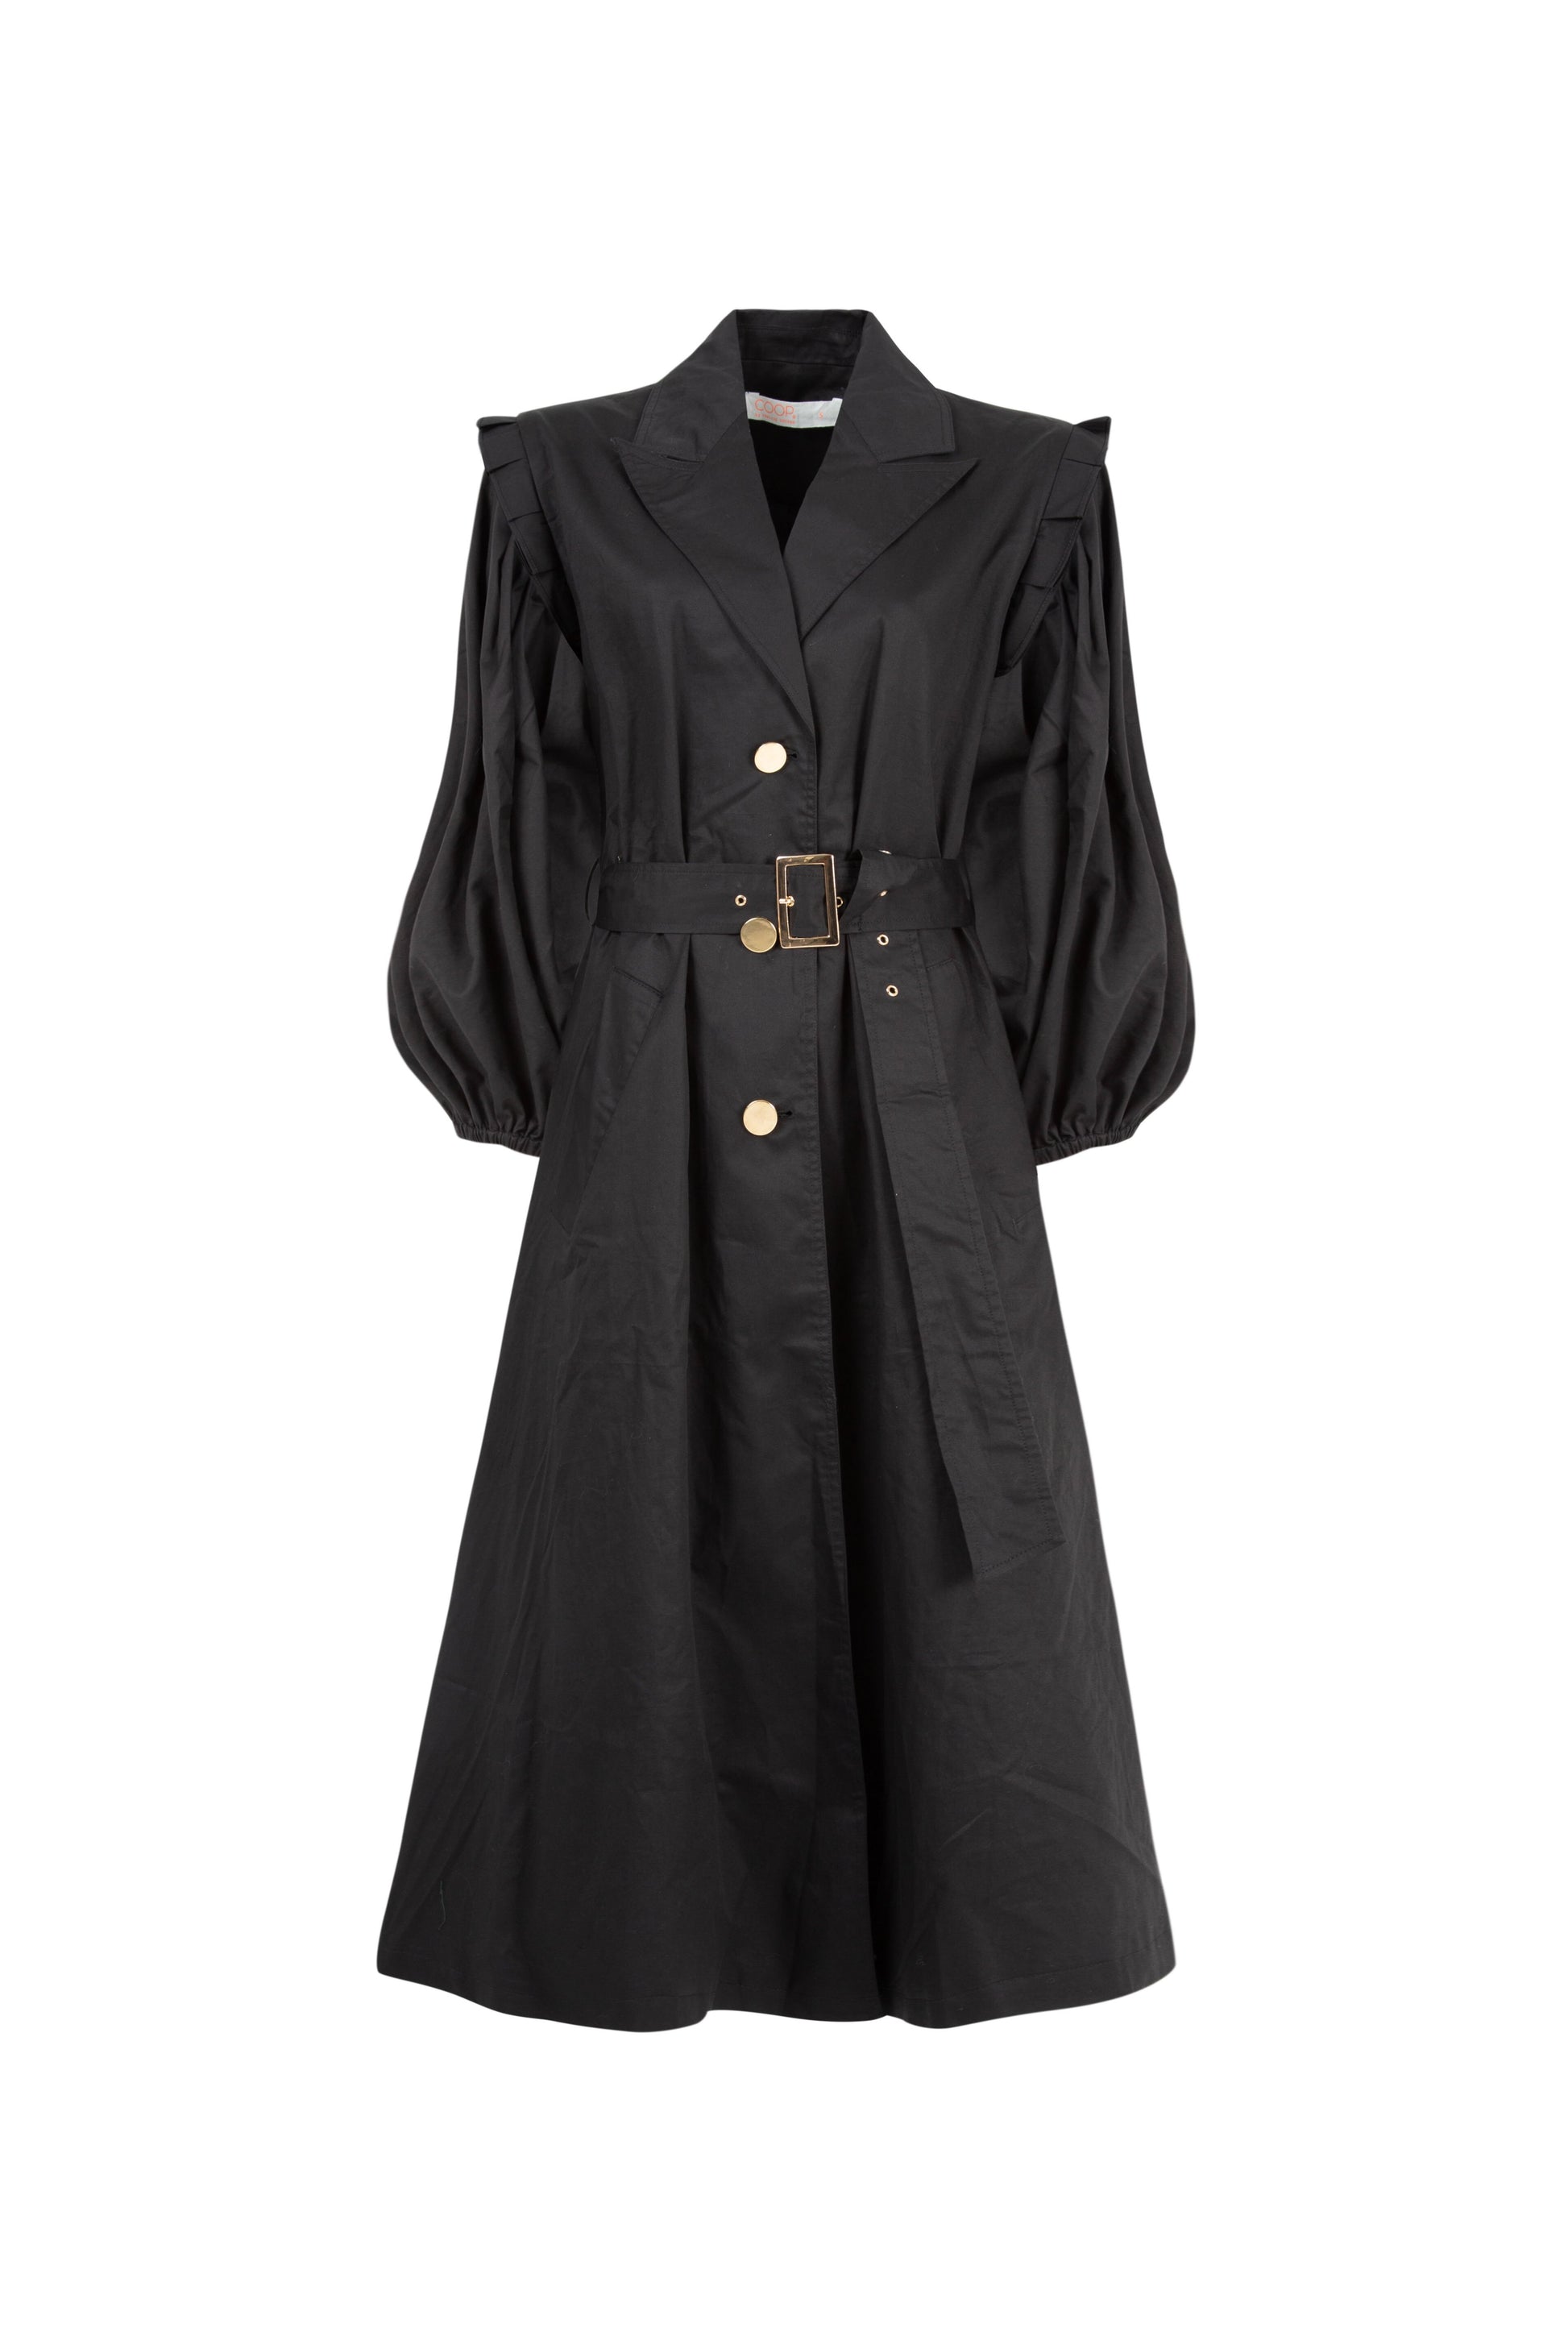 COOP ABSOLUTELY TRENCHED COAT - BLACK - THE VOGUE STORE